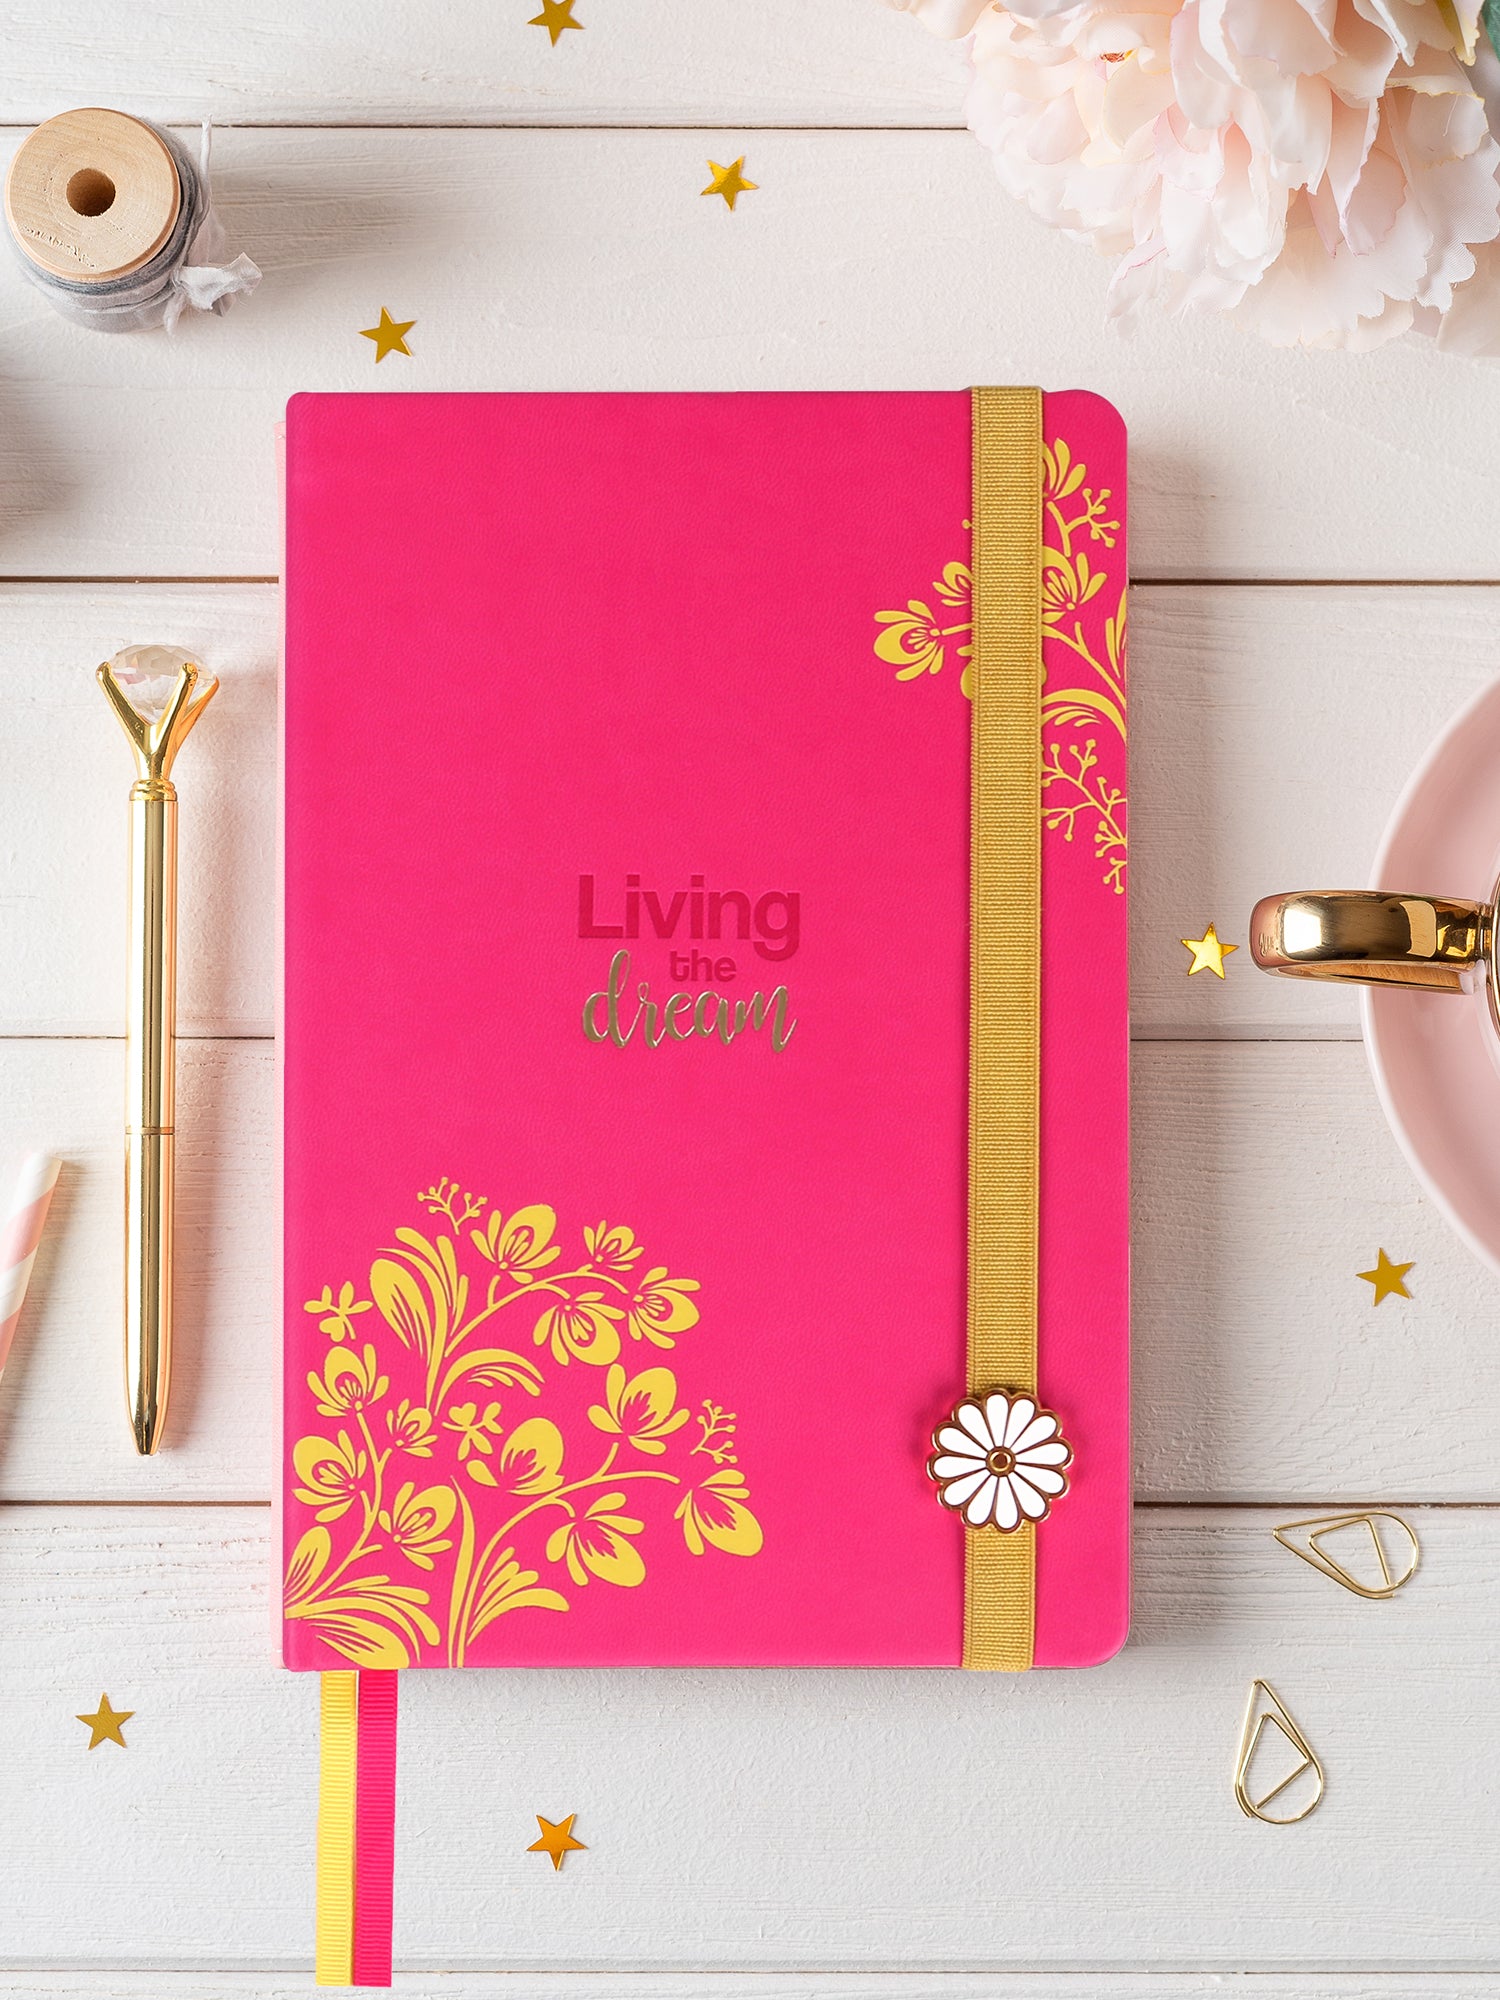 Doodle Living the dream Hard Bound A5 Notebook - Pink - DoodleCollection Store